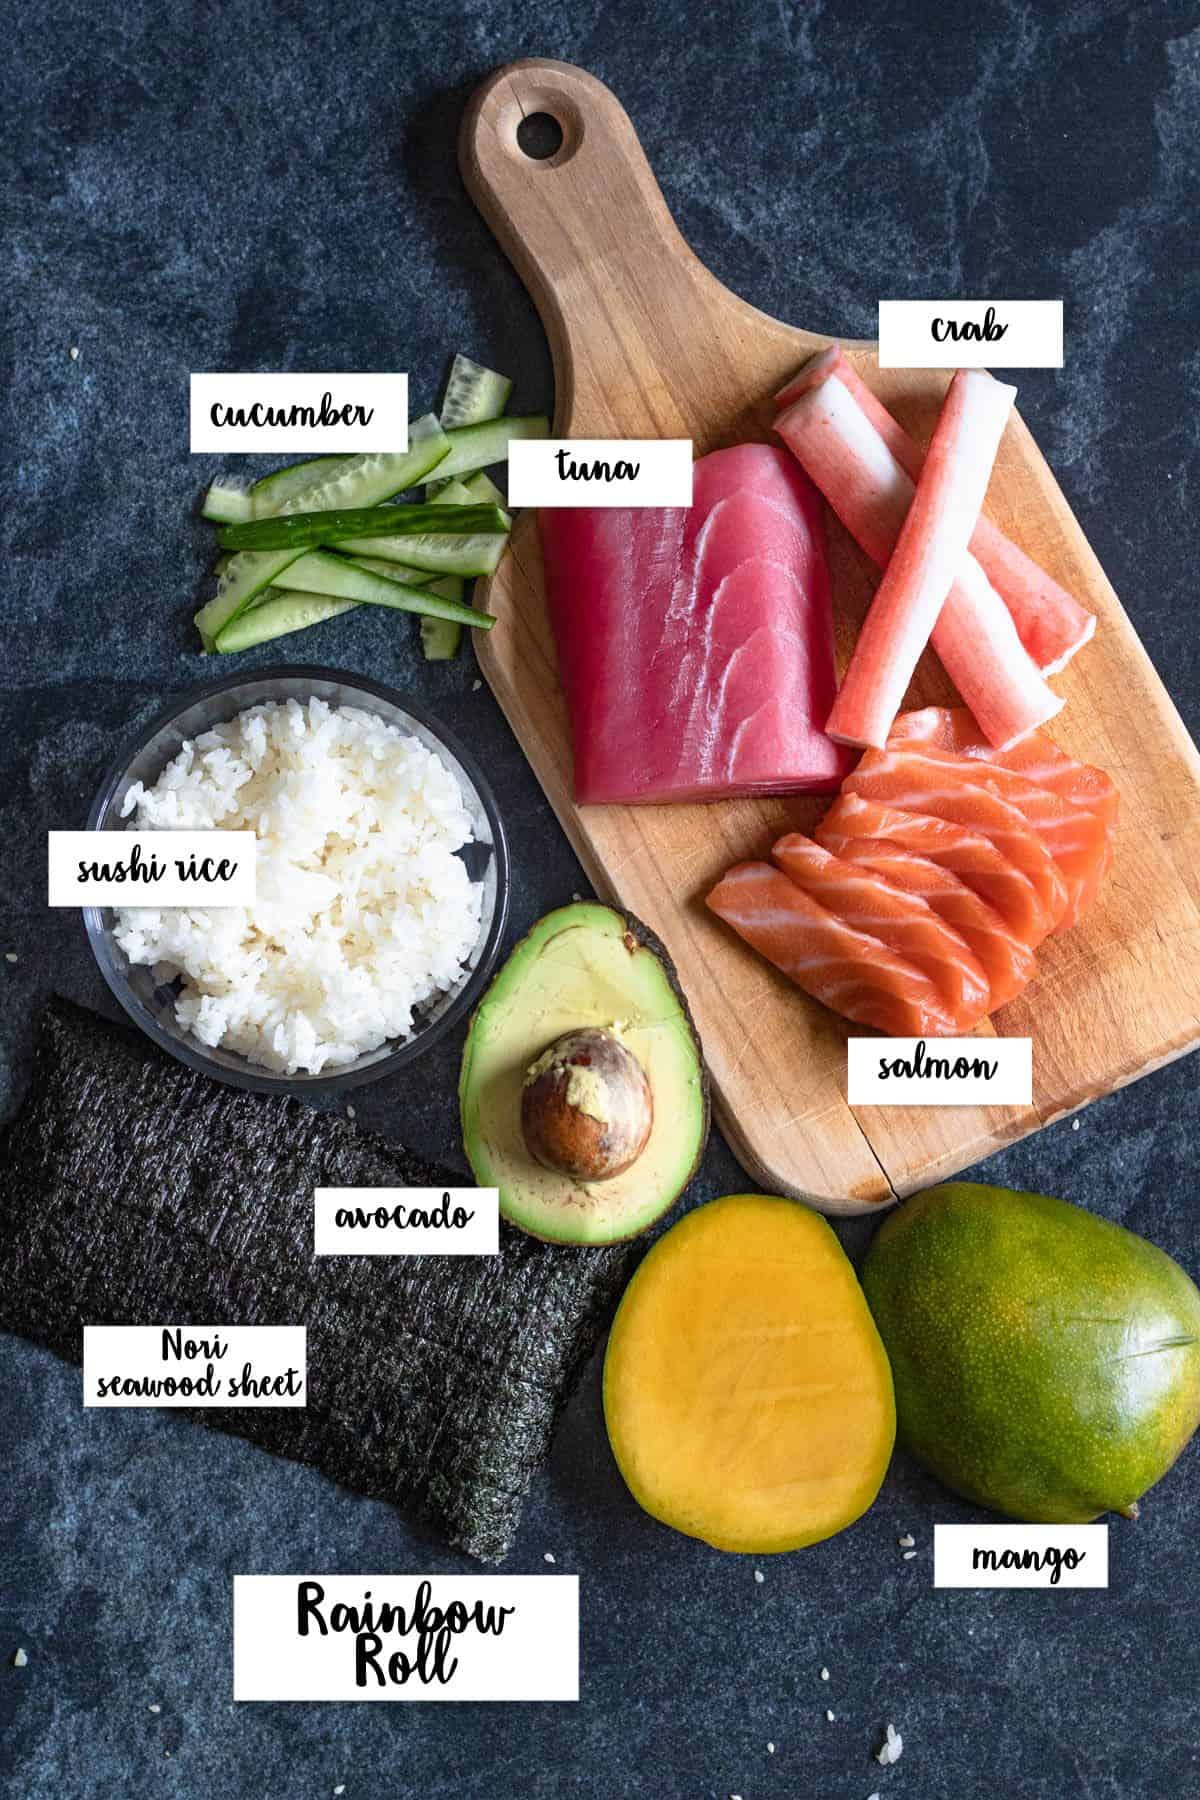 Ingredients shown are used to prepare Rainbow Sushi. 